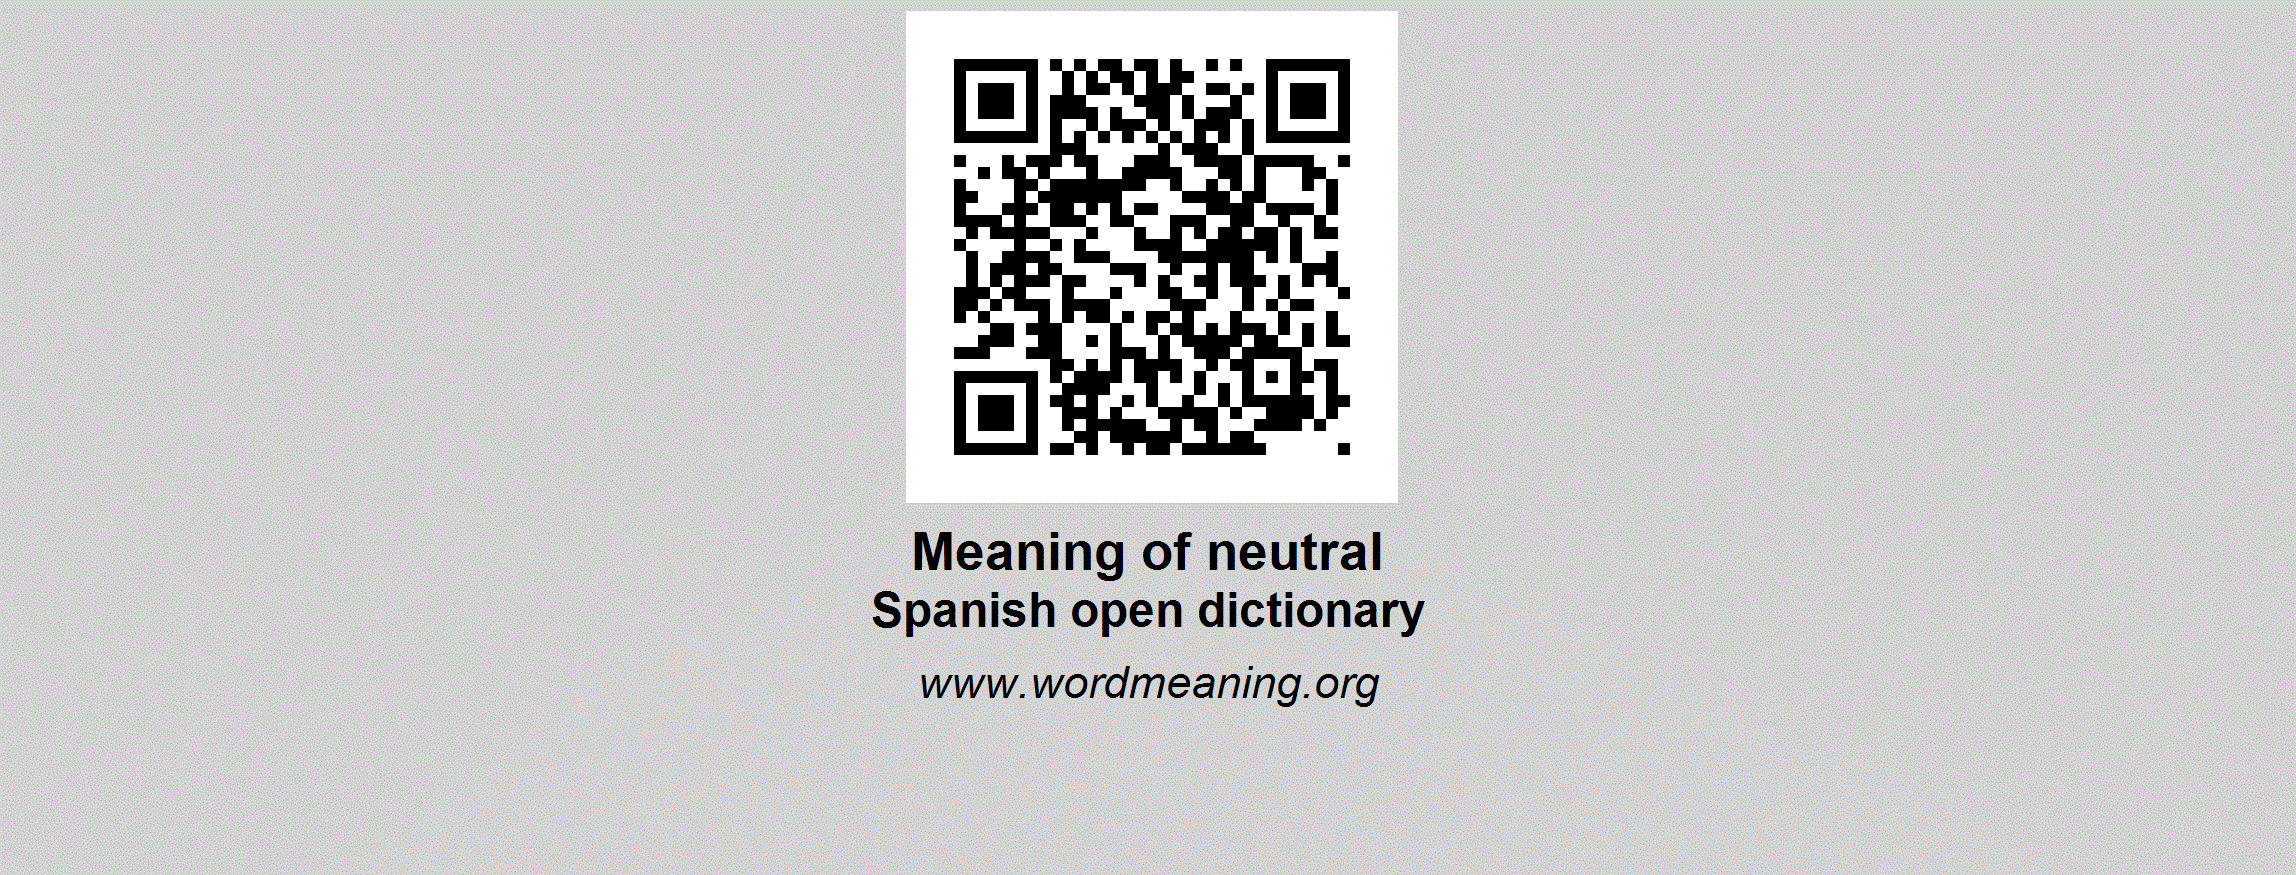 Meaning neutral